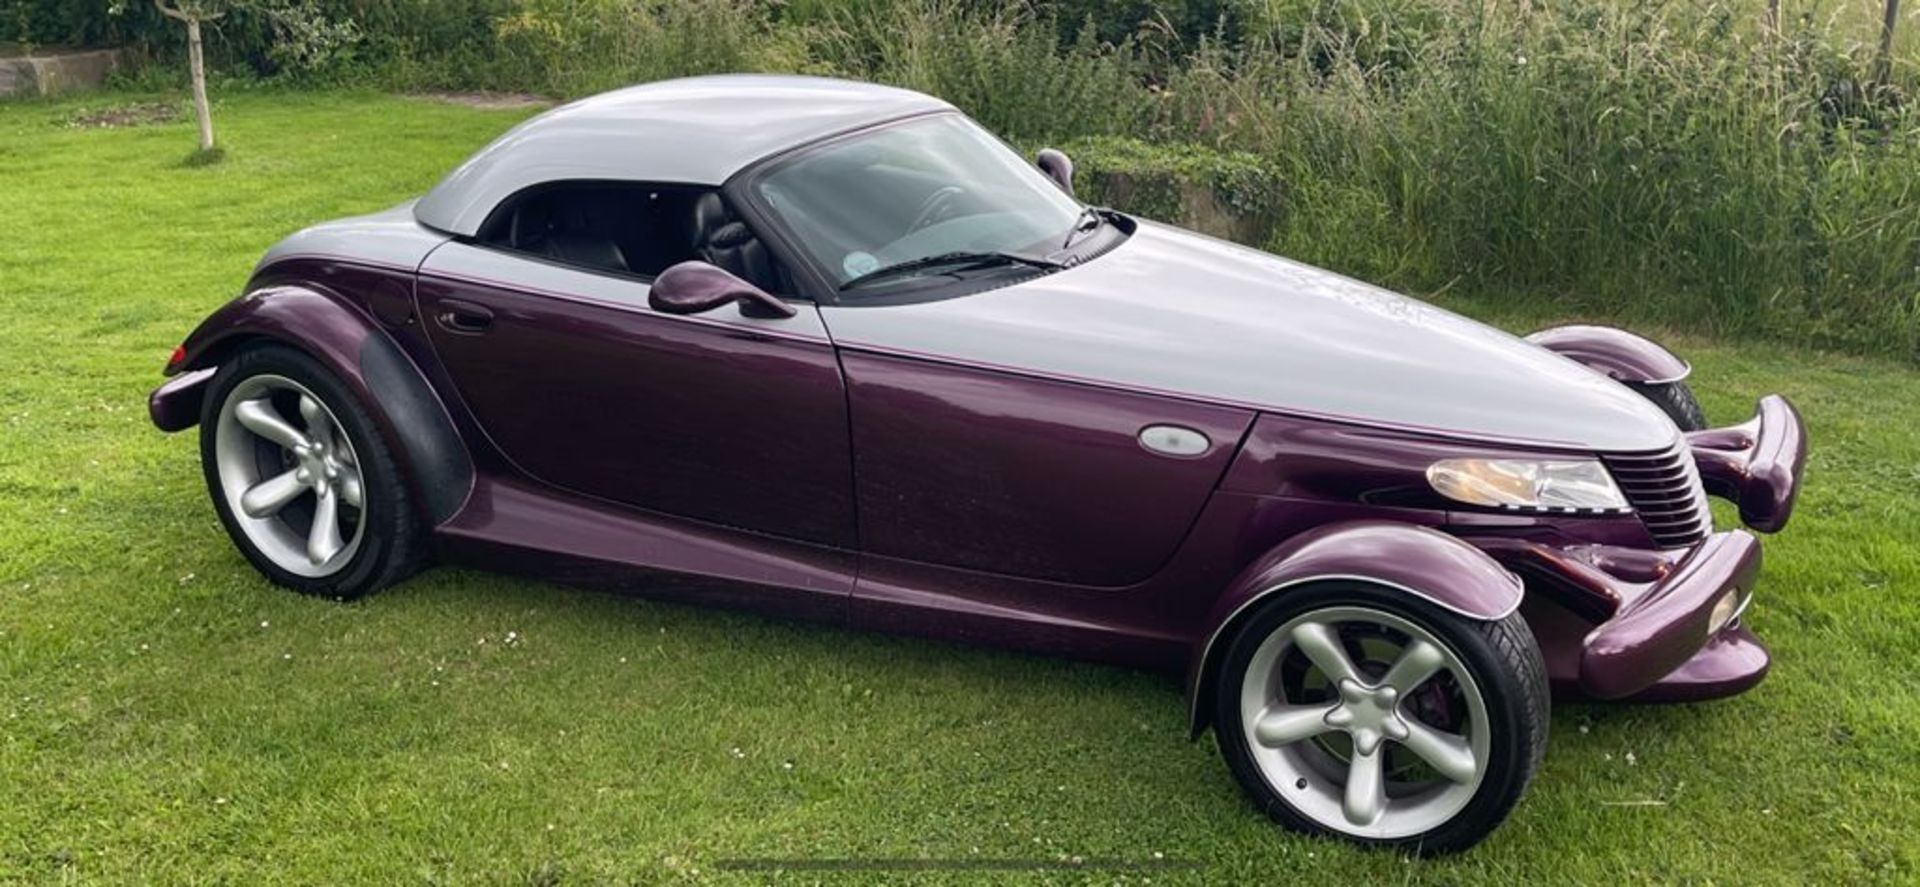 1998 CHRYSLER PLYMOUTH PROWLER V6 2 DOOR CONVERTIBLE, 3500cc PETROL ENGINE, AUTO *NO VAT* - Image 5 of 32